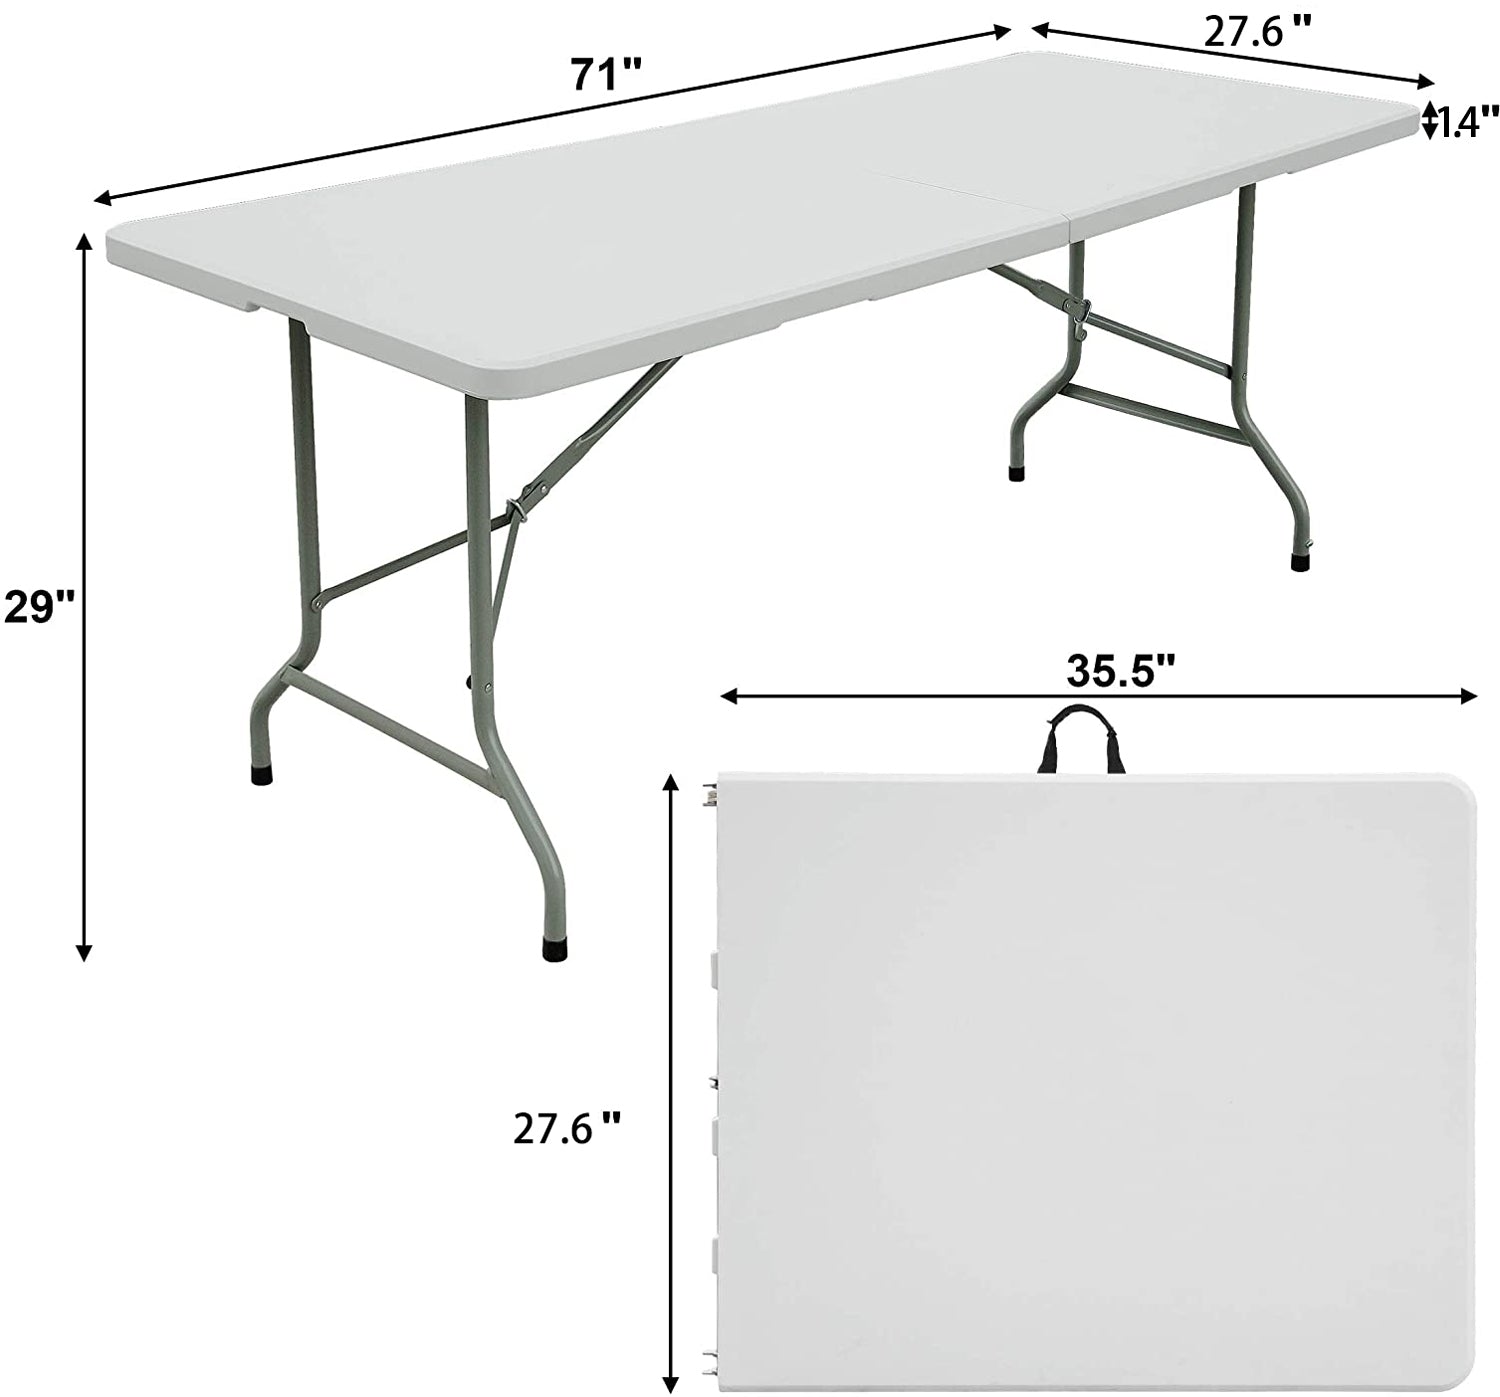 SKONYON 6ft Table, Plastic Folding Table with Carrying Handle Rectangular - Lightweight and Portable (White)